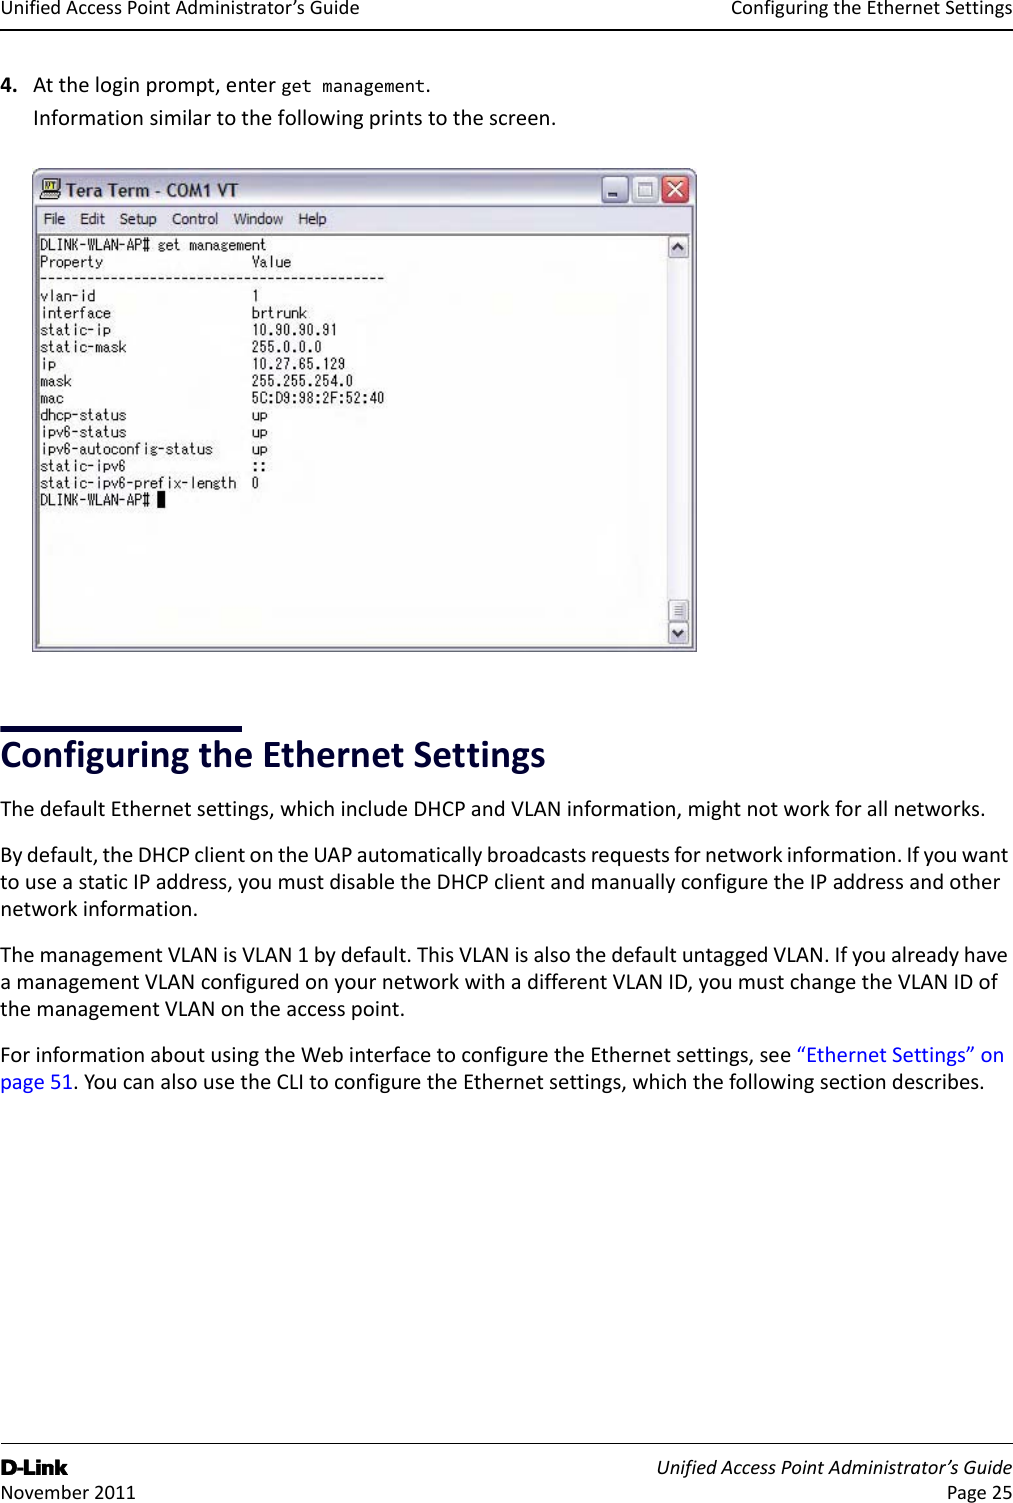 ConfiguringtheEthernetSettingsD-Link UnifiedAccessPointAdministrator’sGuide November2011 Page25UnifiedAccessPointAdministrator’sGuide4. Attheloginprompt,entergetmanagement.Informationsimilartothefollowingprintstothescreen.ConfiguringtheEthernetSettingsThedefaultEthernetsettings,whichincludeDHCPandVLANinformation,mightnotworkforallnetworks.Bydefault,theDHCPclientontheUAPautomaticallybroadcastsrequestsfornetworkinformation.IfyouwanttouseastaticIPaddress,youmustdisabletheDHCPclientandmanuallyconfiguretheIPaddressandothernetworkinformation.ThemanagementVLANisVLAN1bydefault.ThisVLANisalsothedefaultuntaggedVLAN.IfyoualreadyhaveamanagementVLANconfiguredonyournetworkwithadifferentVLANID,youmustchangetheVLANIDofthemanagementVLANontheaccesspoint.ForinformationaboutusingtheWebinterfacetoconfiguretheEthernetsettings,see“EthernetSettings”onpage51.YoucanalsousetheCLItoconfiguretheEthernetsettings,whichthefollowingsectiondescribes.